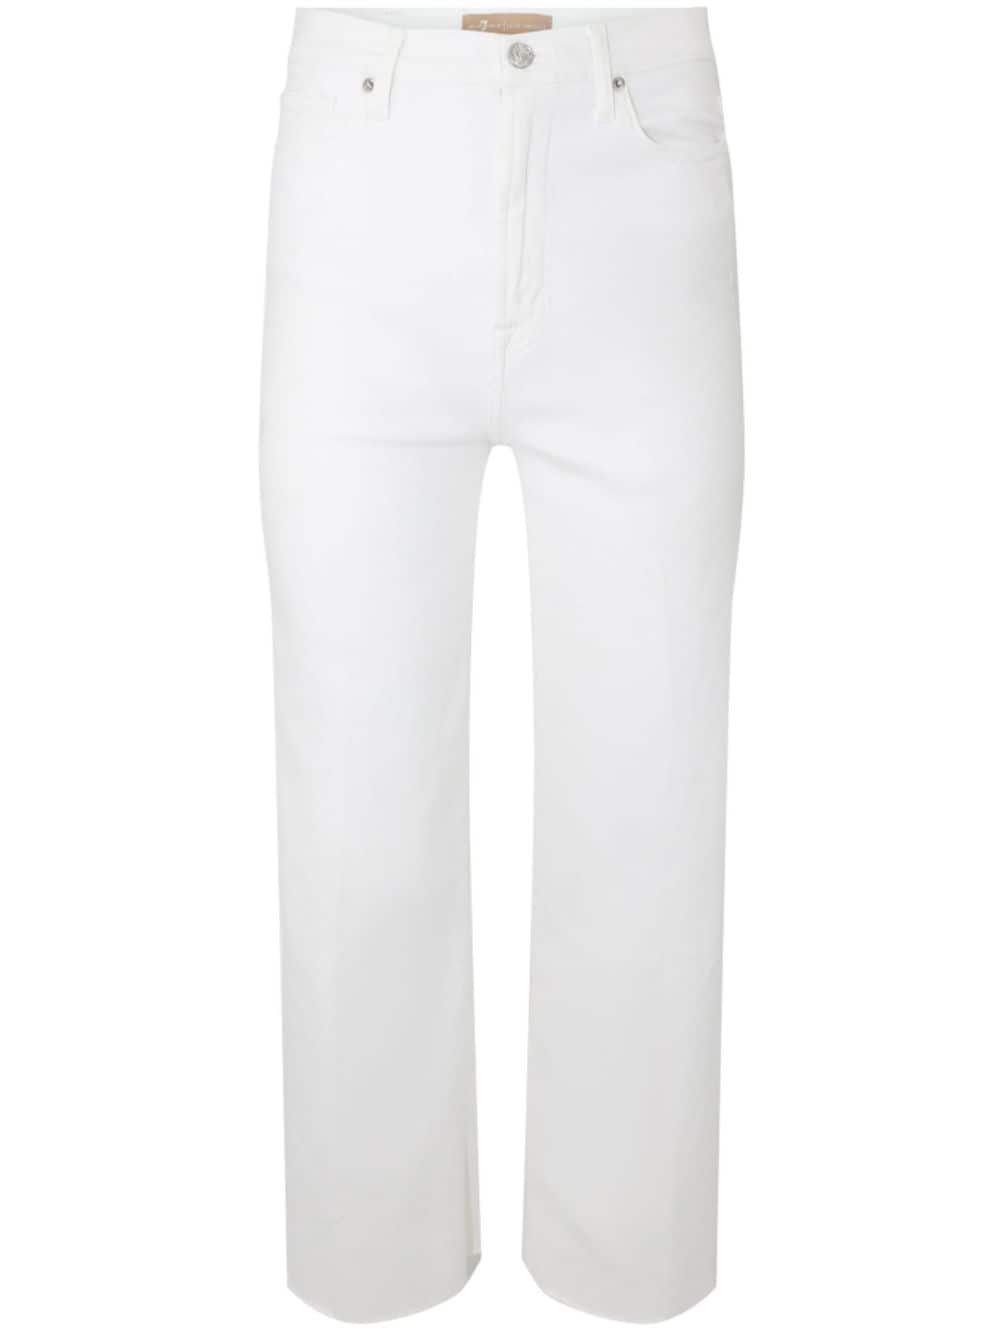 7 For All Mankind Jo high-rise cropped jeans - White von 7 For All Mankind